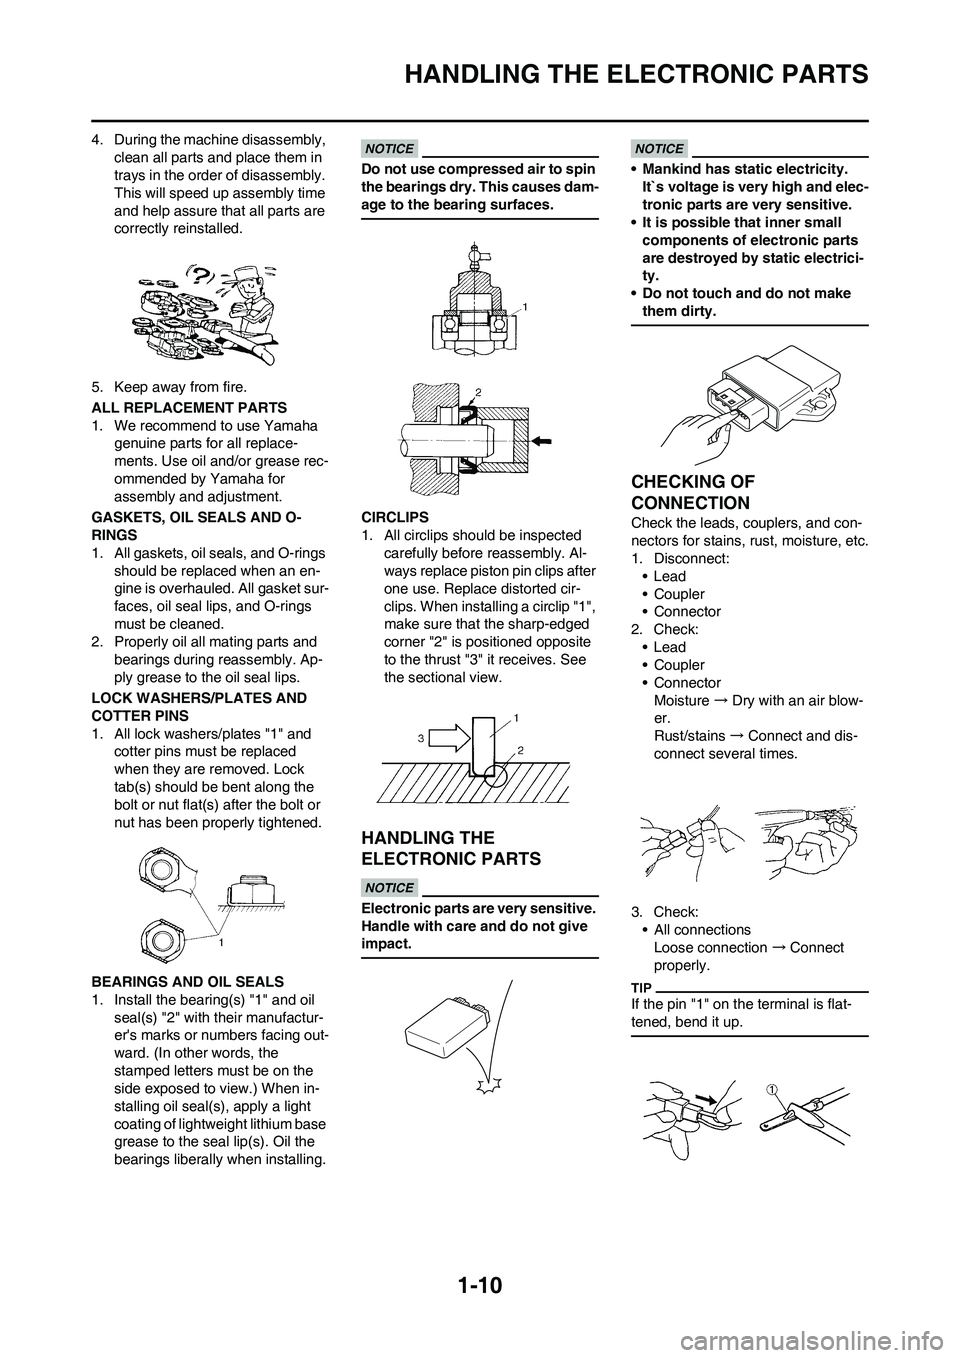 YAMAHA YZ450F 2010 User Guide 1-10
HANDLING THE ELECTRONIC PARTS
4. During the machine disassembly, 
clean all parts and place them in 
trays in the order of disassembly. 
This will speed up assembly time 
and help assure that all